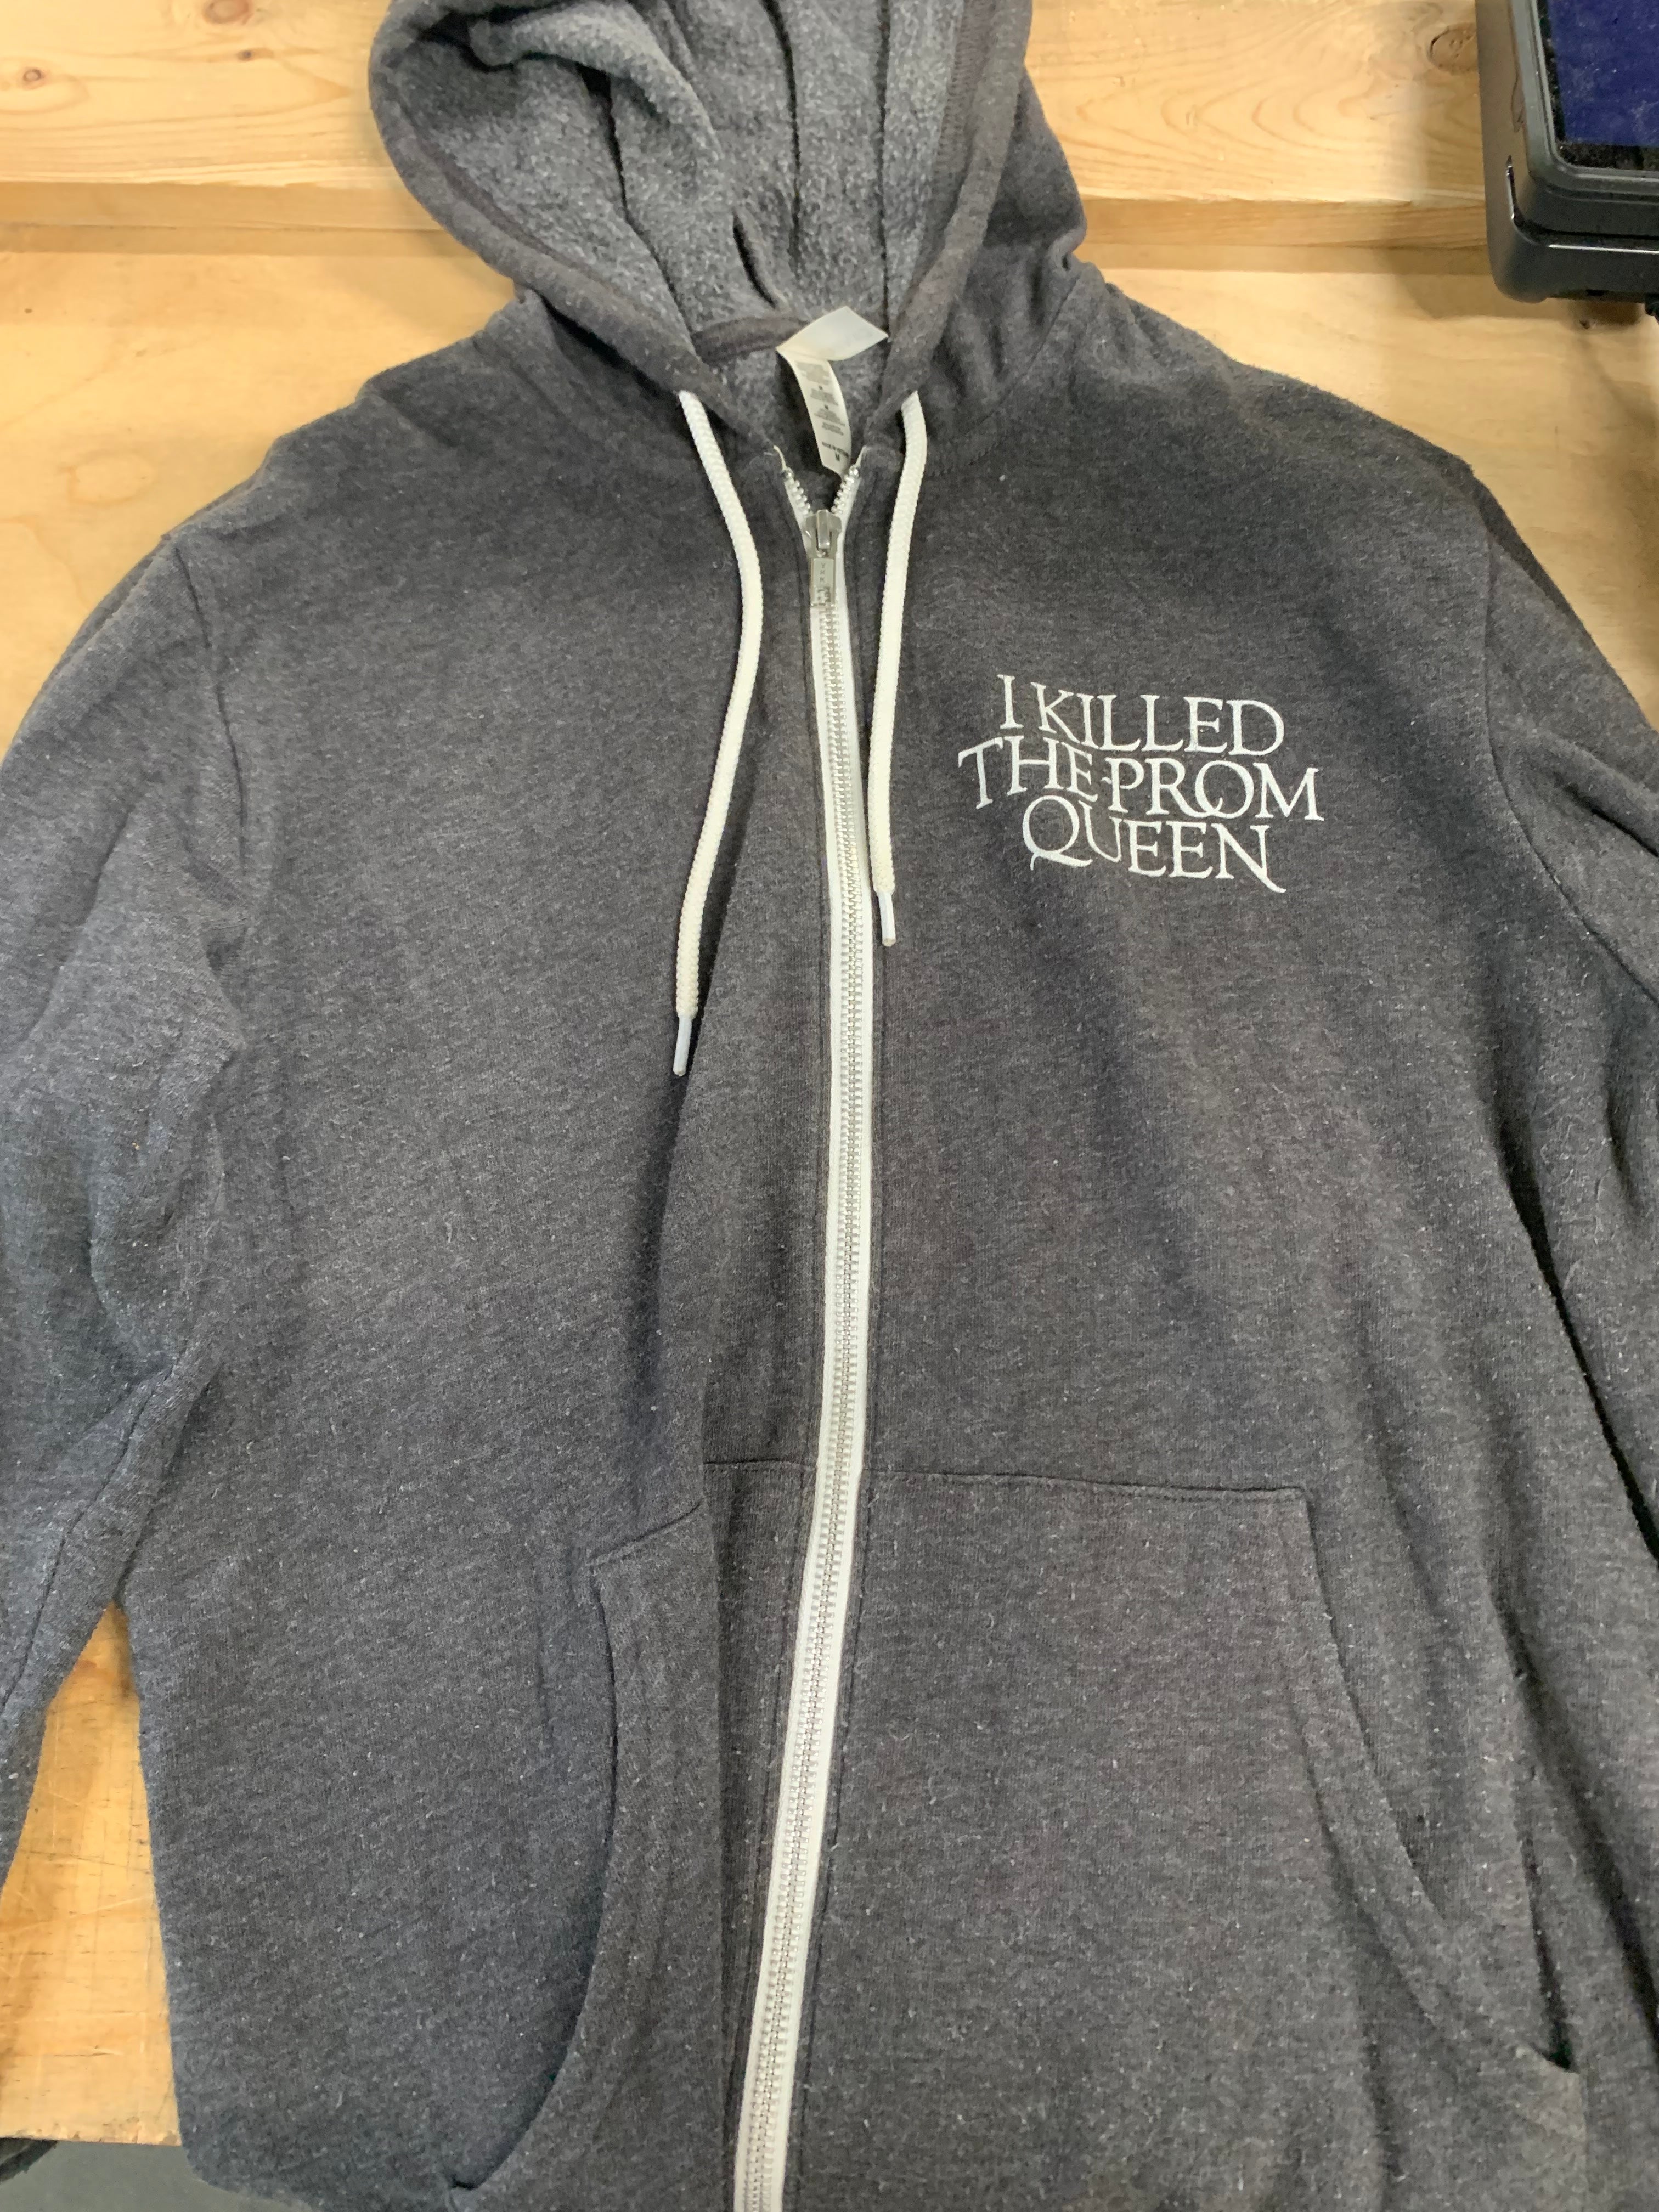 I Killed The Prom Queen Zip Up Hoodie, Gray, M